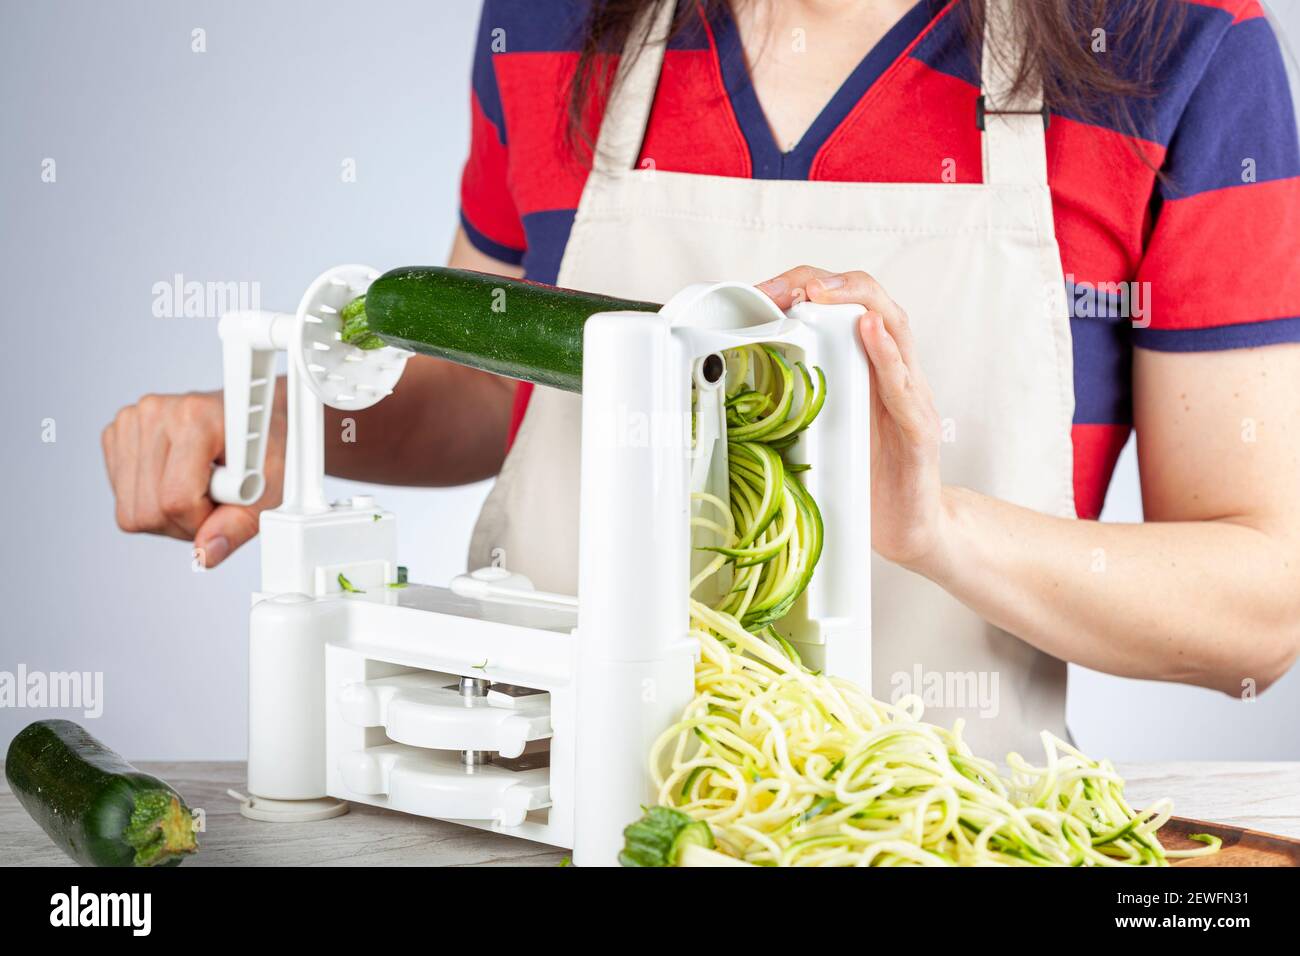 https://c8.alamy.com/comp/2EWFN31/a-caucasian-woman-wearing-apron-is-turning-the-handle-of-a-vegetable-spiralizer-slicer-to-make-homemade-zucchini-noodles-on-kitchen-countertop-this-2EWFN31.jpg